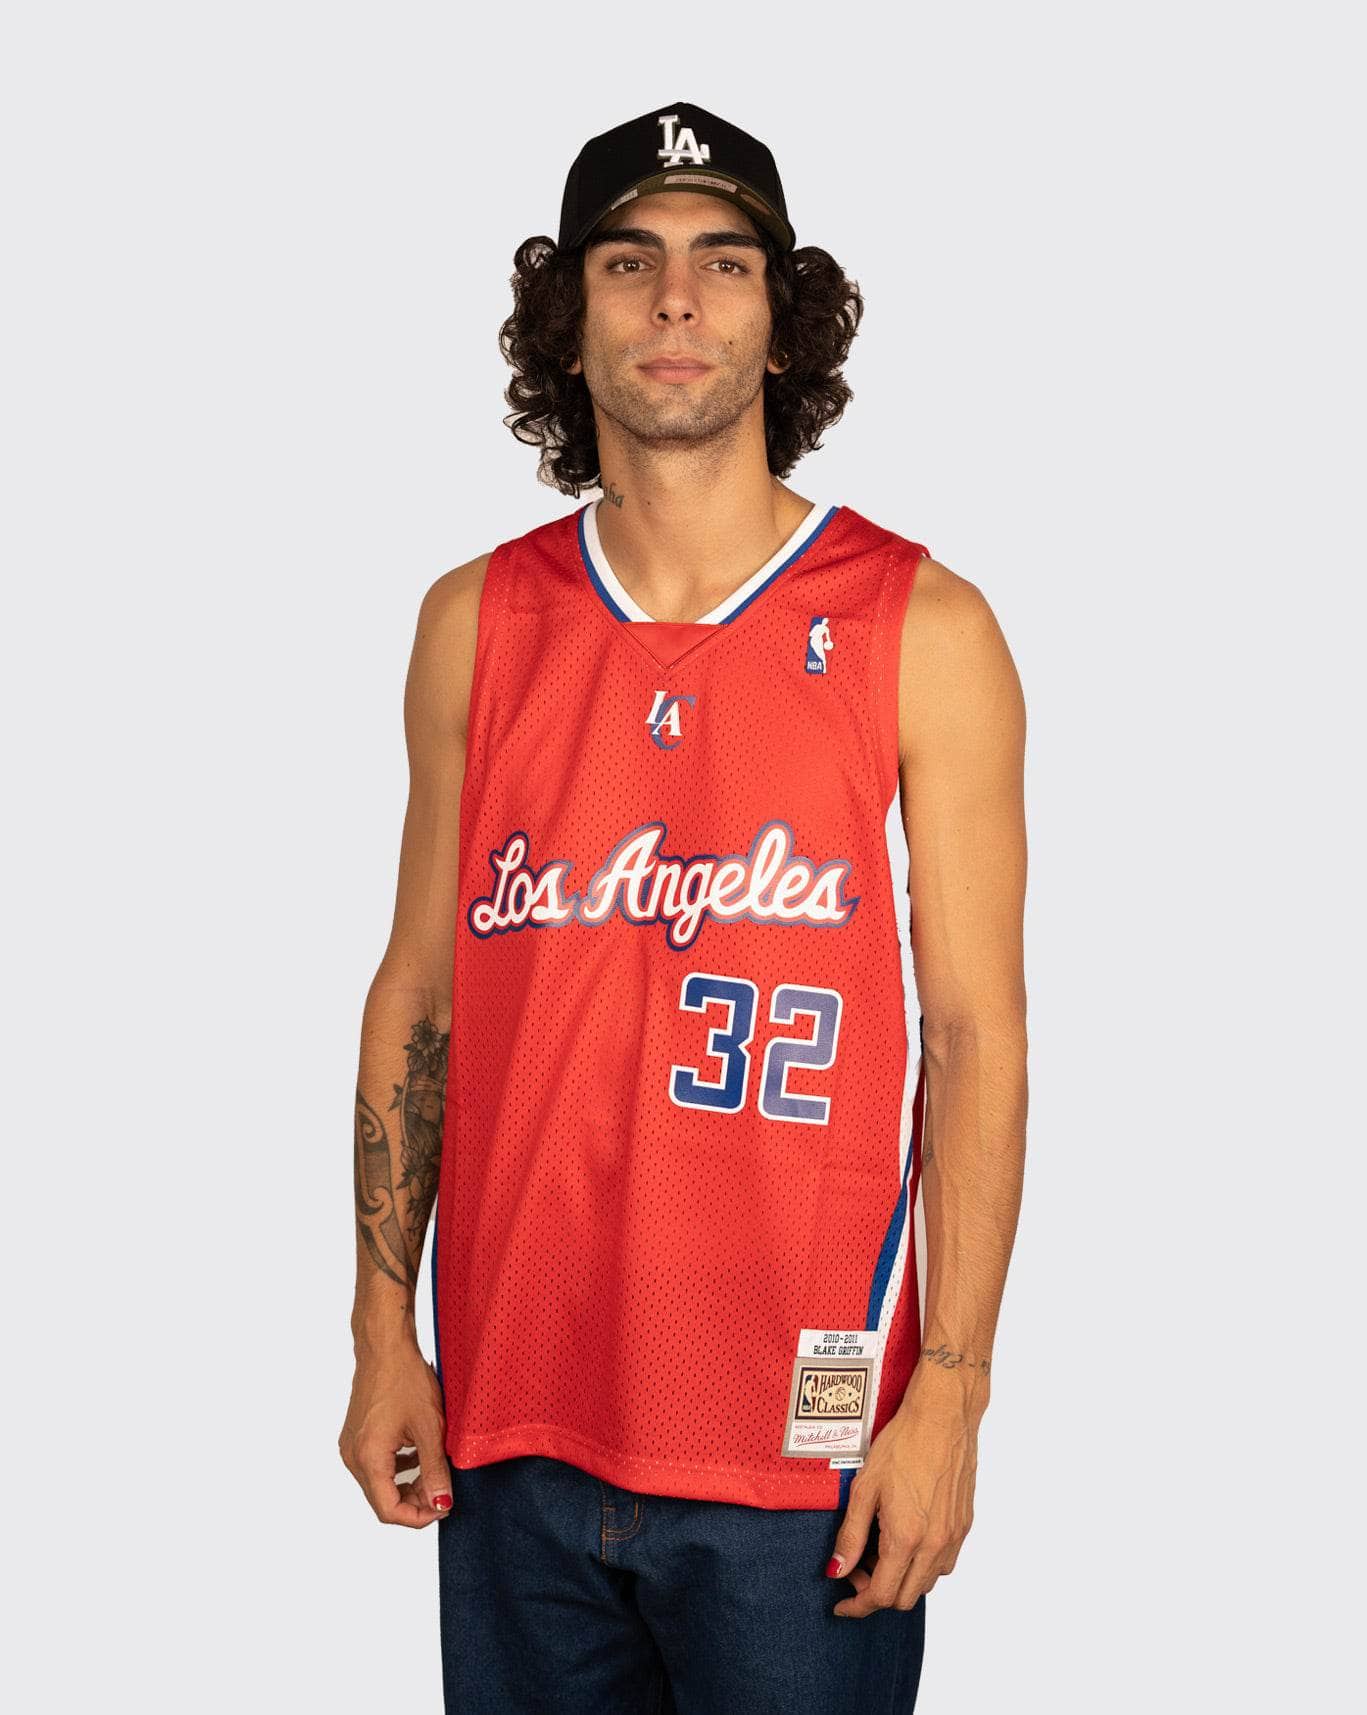 Swingman Blake Griffin Los Angeles Clippers 2010-11 Jersey - Shop Mitchell  & Ness Swingman Jerseys and Replicas Mitchell & Ness Nostalgia Co.